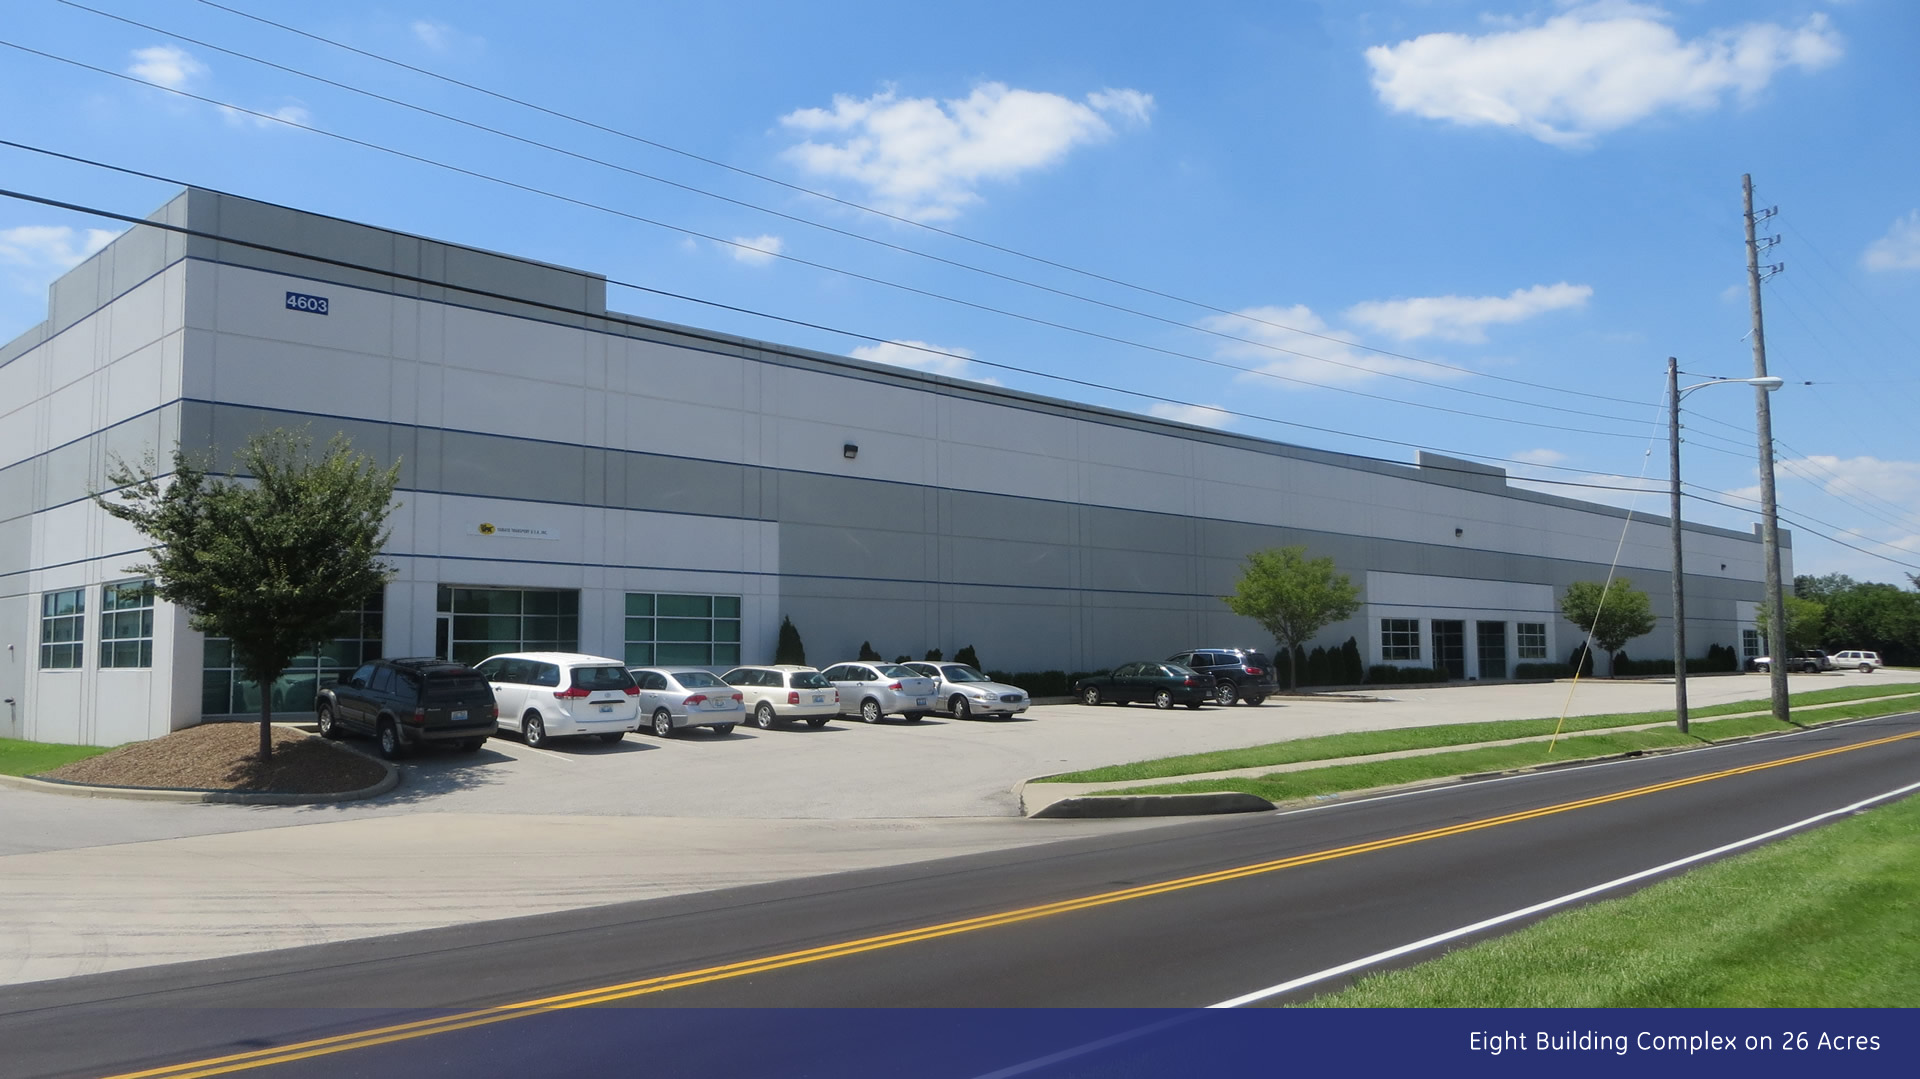 Commercial Property for Lease near airport